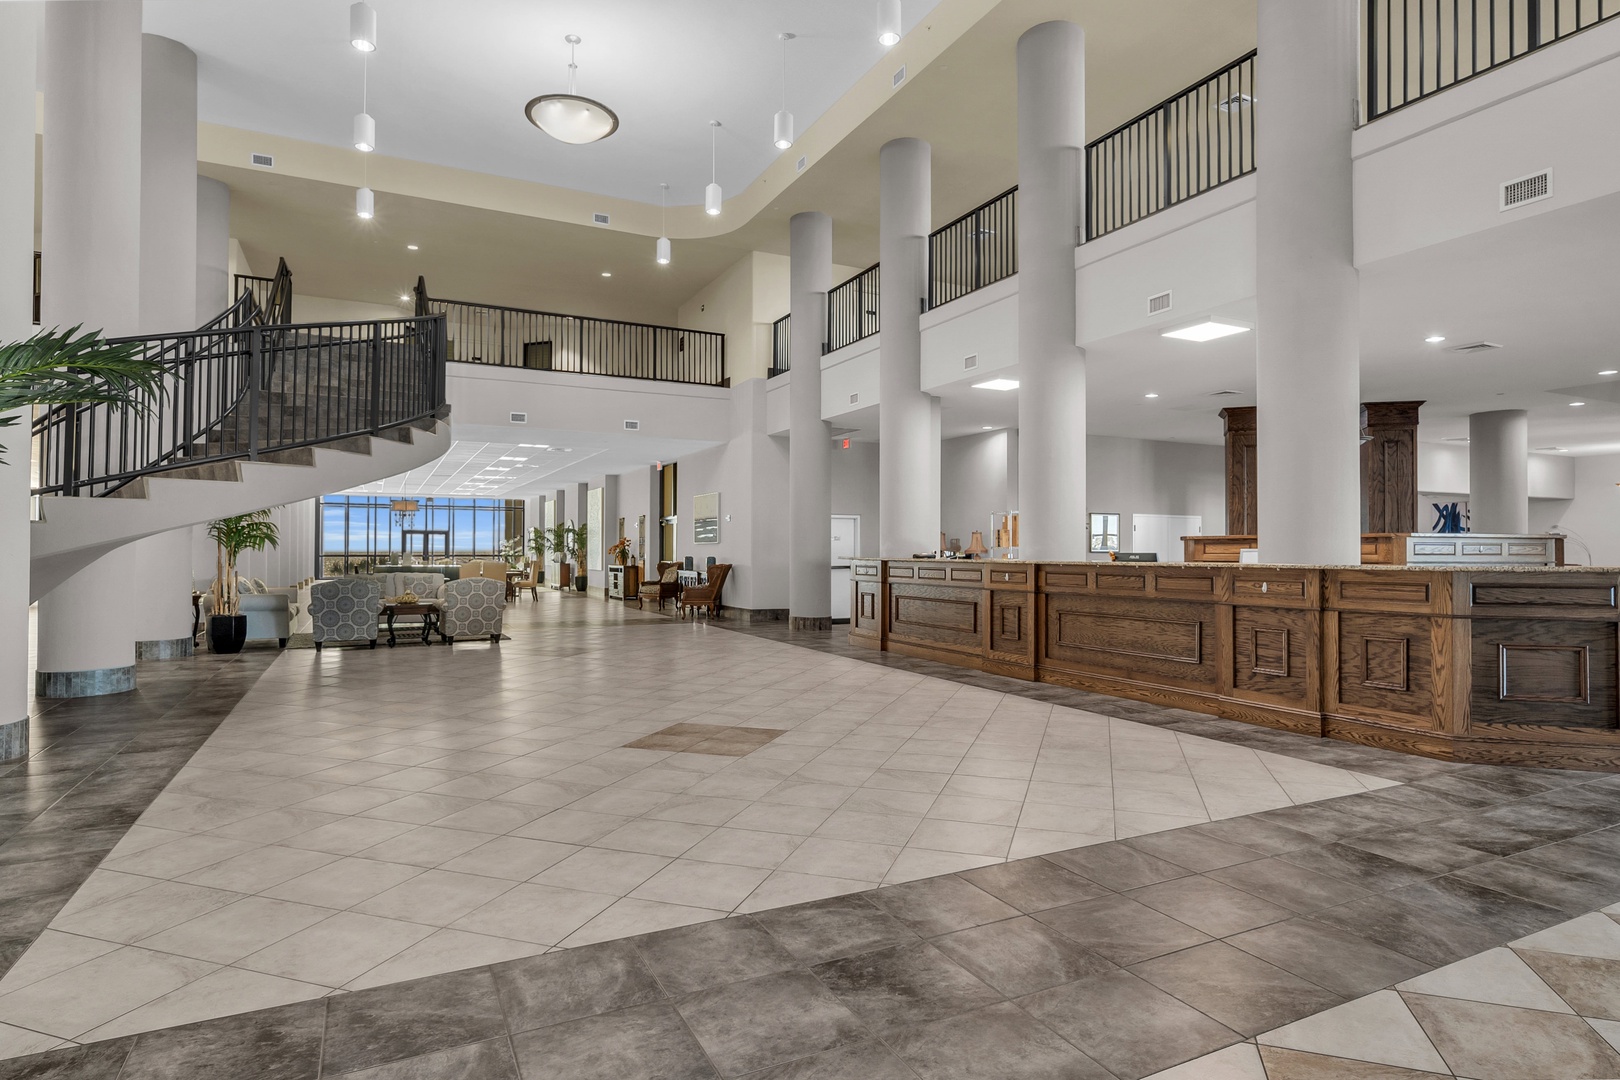 Front desk lobby for parking and amenity passes